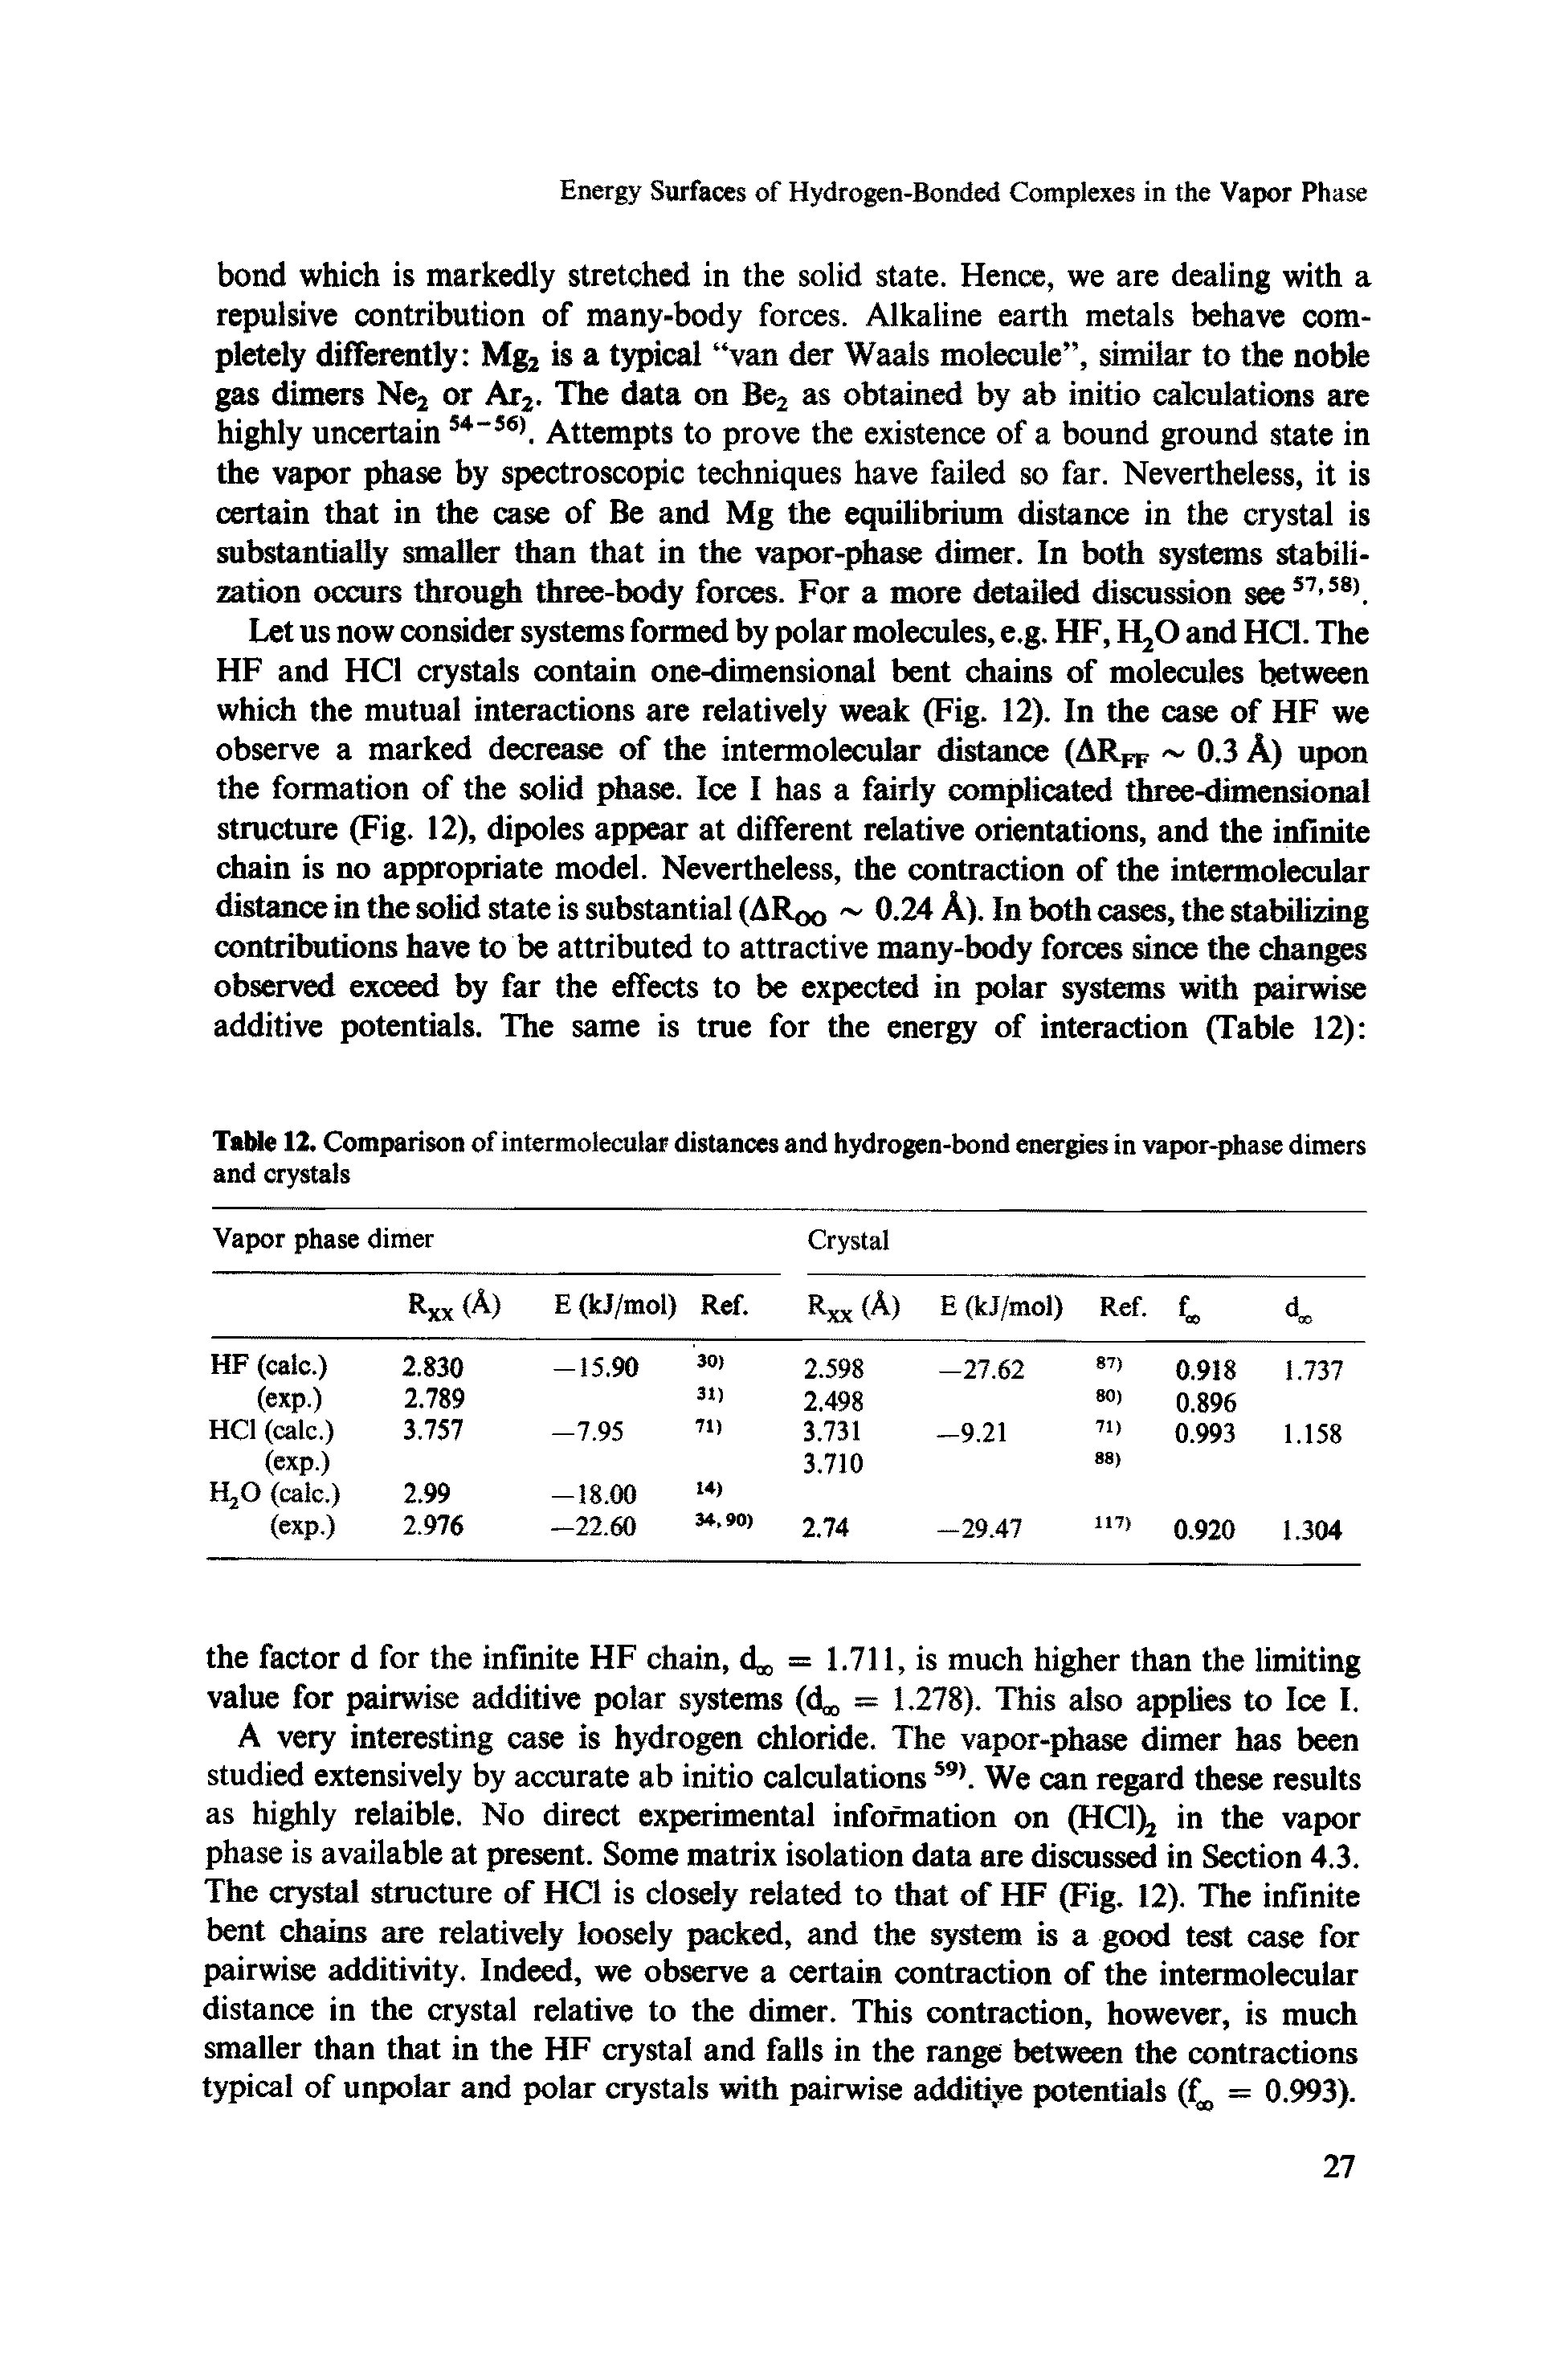 Table 12. Comparison of intermoleeular distances and hydrogen-bond energies in vapor-phase dimers and crystals...